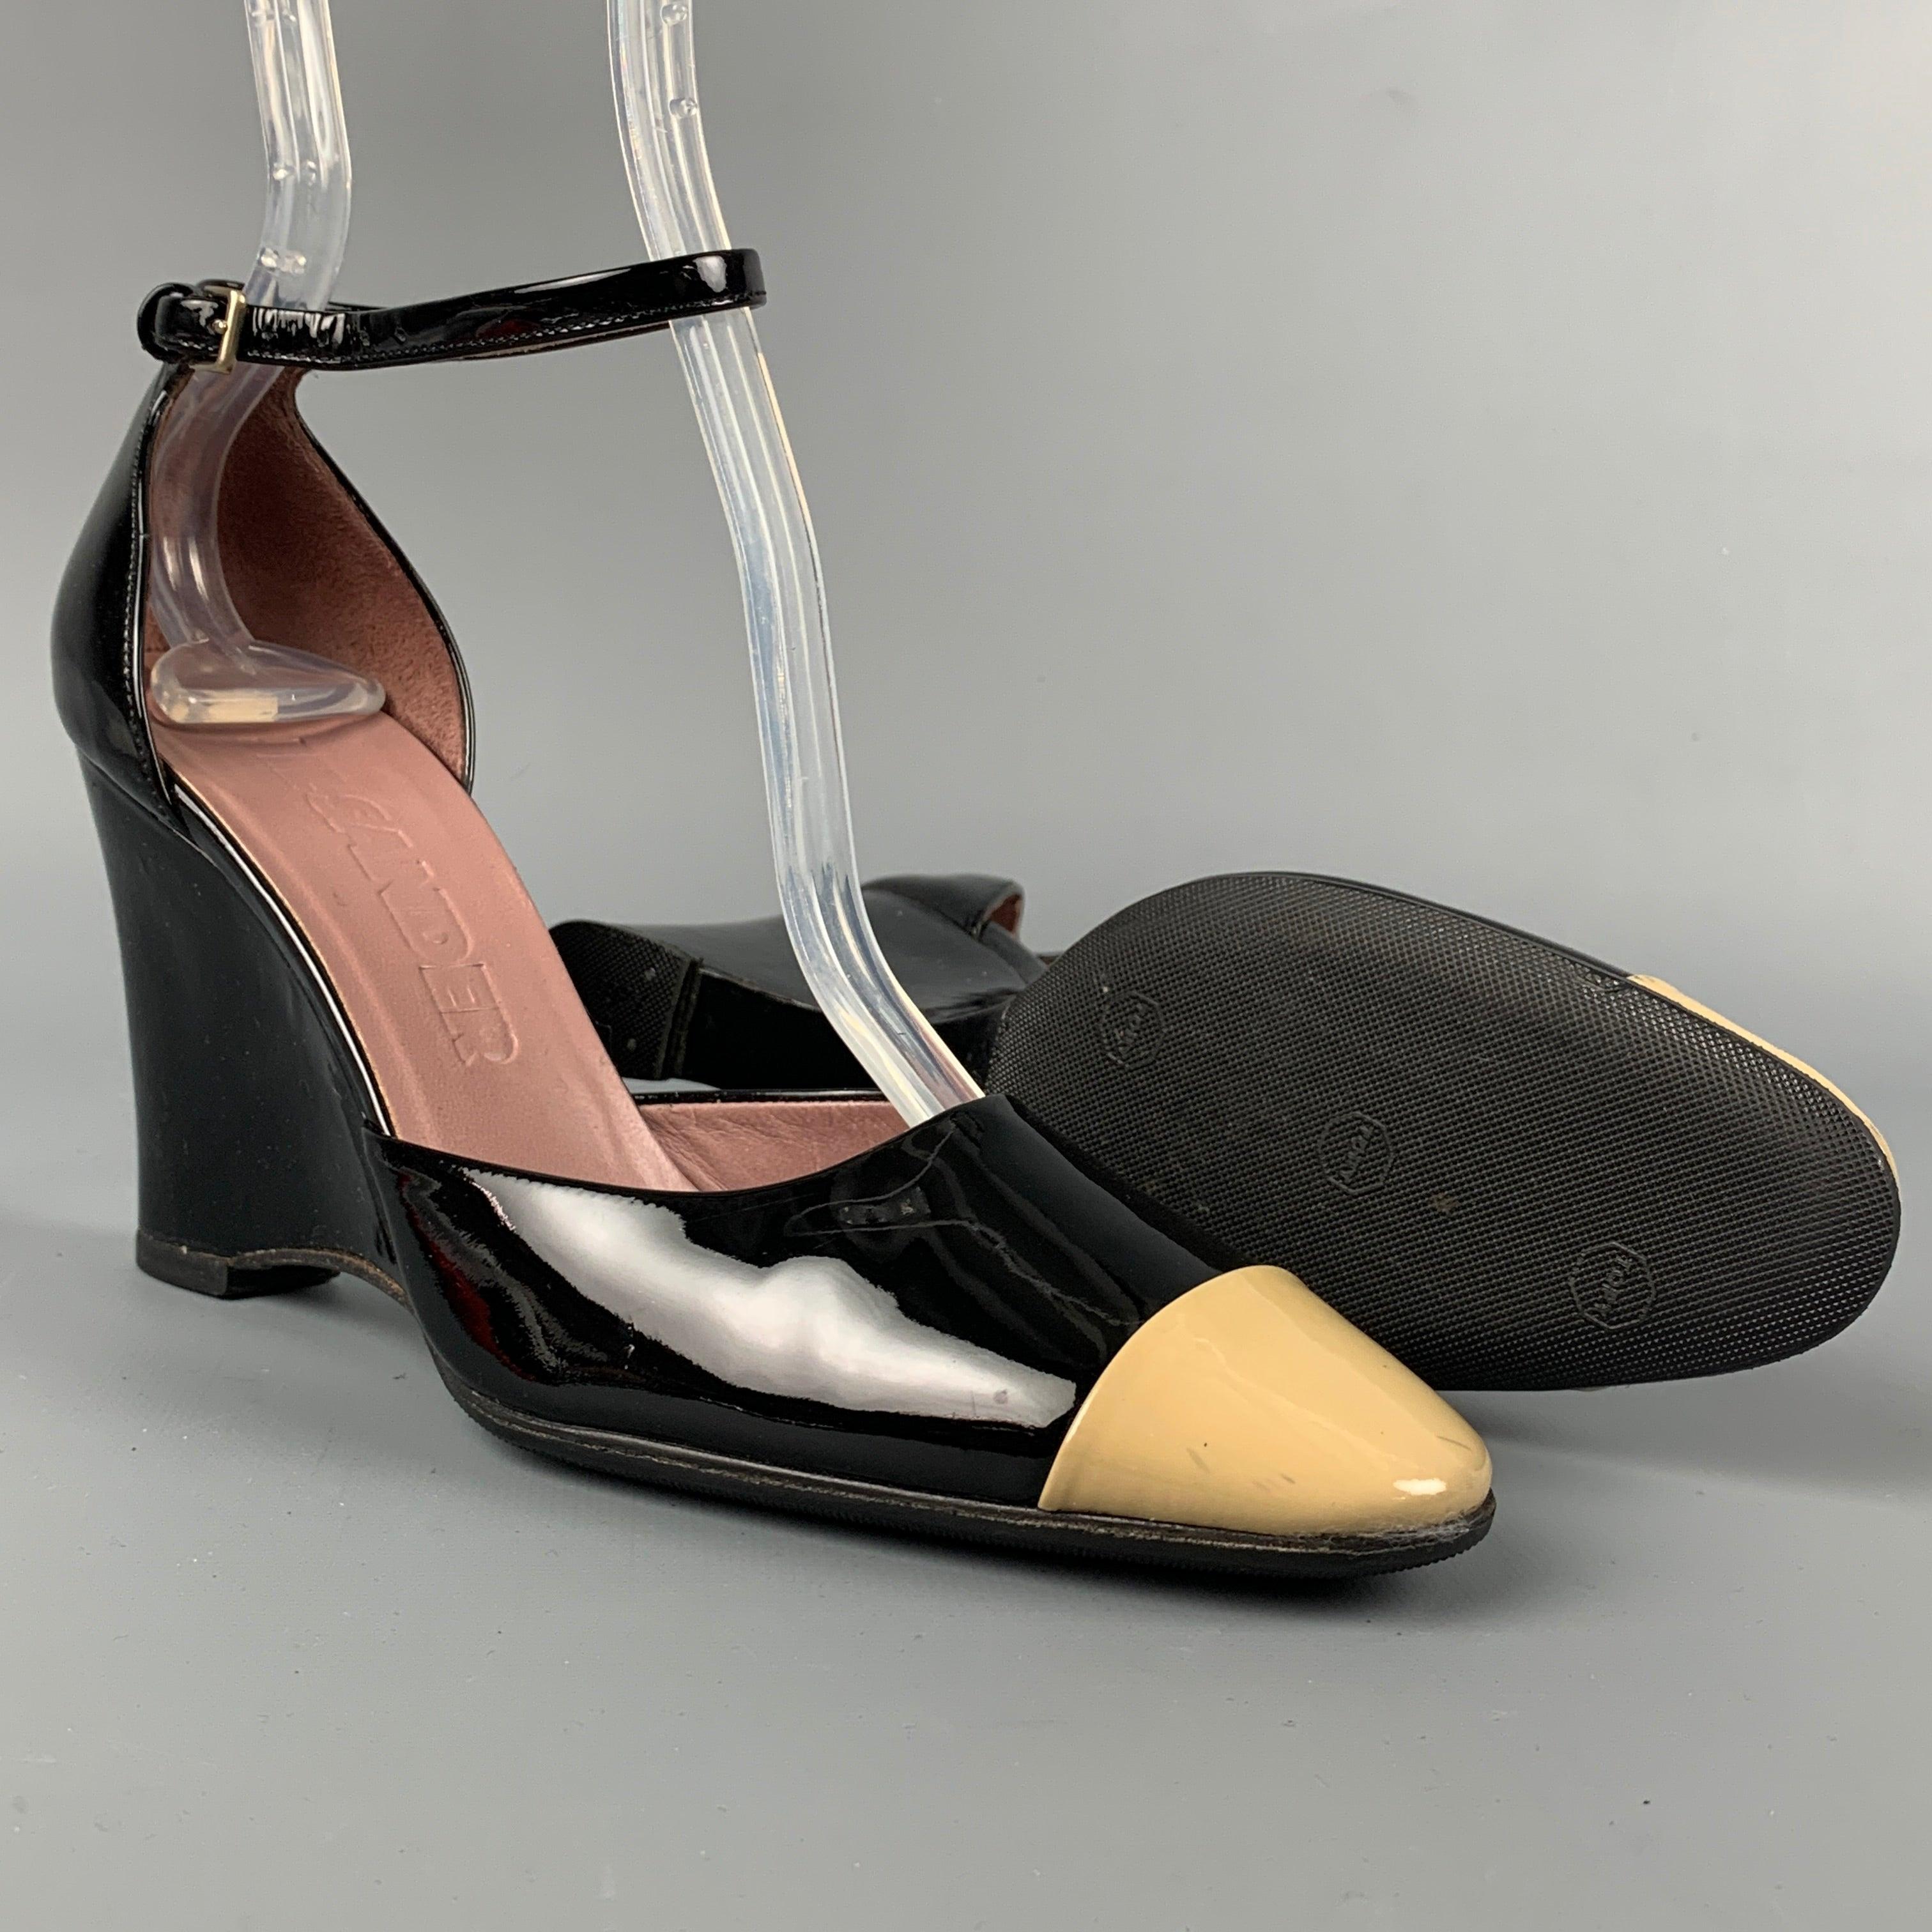 JIL SANDER Size 6.5 Black & Nude Color Block Patent Leather Pumps In Good Condition For Sale In San Francisco, CA